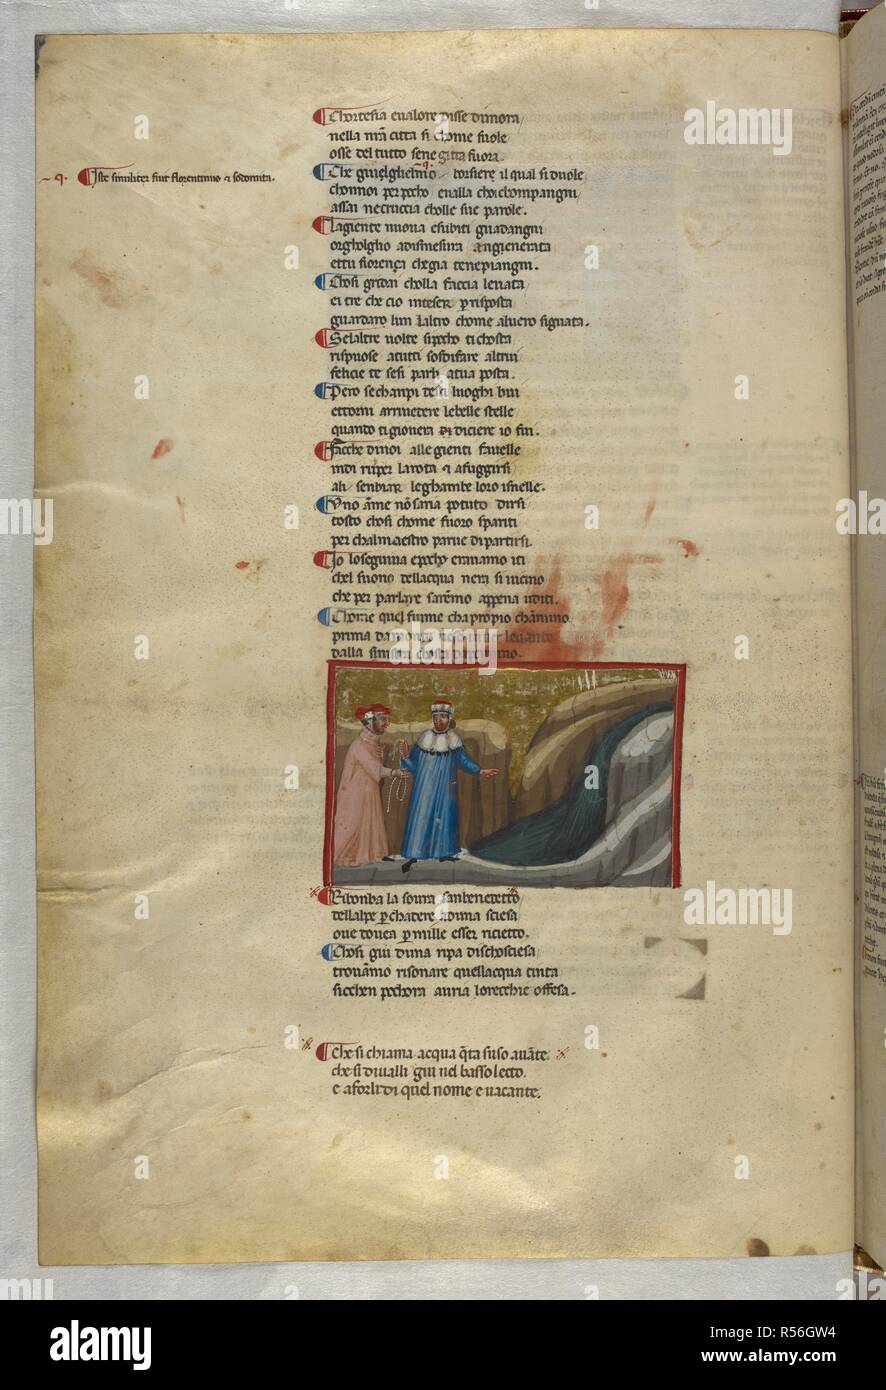 Inferno: At a waterfall. Dante Alighieri, Divina Commedia ( The Divine Comedy ), with a commentary in Latin. 1st half of the 14th century. Source: Egerton 943, f.29v. Language: Italian, Latin. Stock Photo